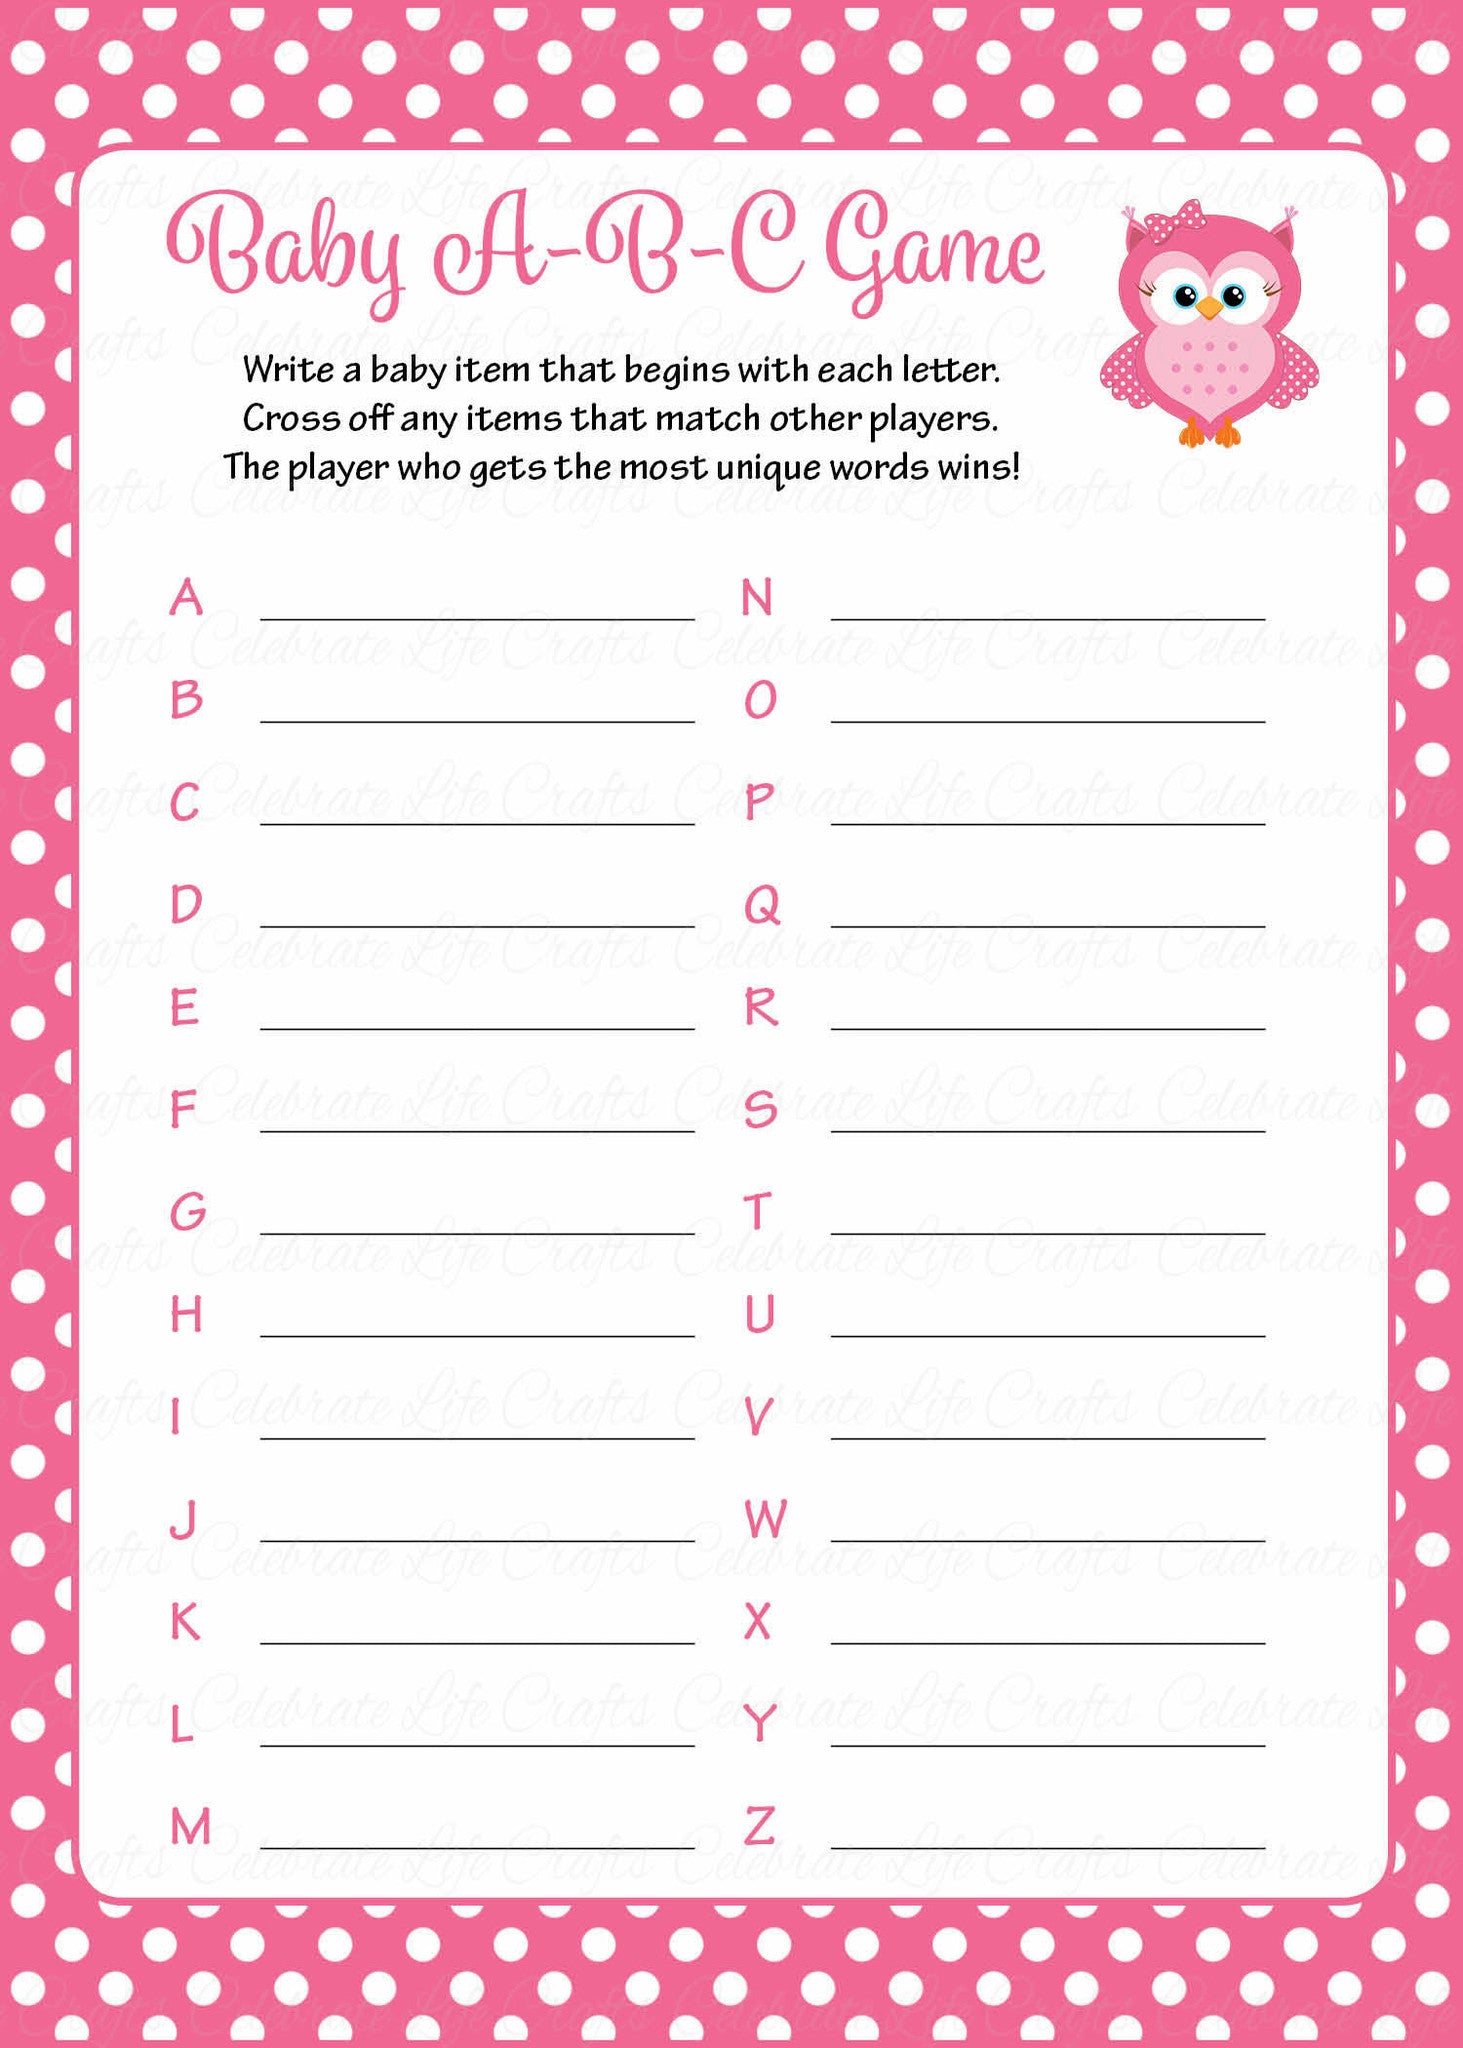 free-printable-baby-shower-games-a-to-z-create-and-edit-free